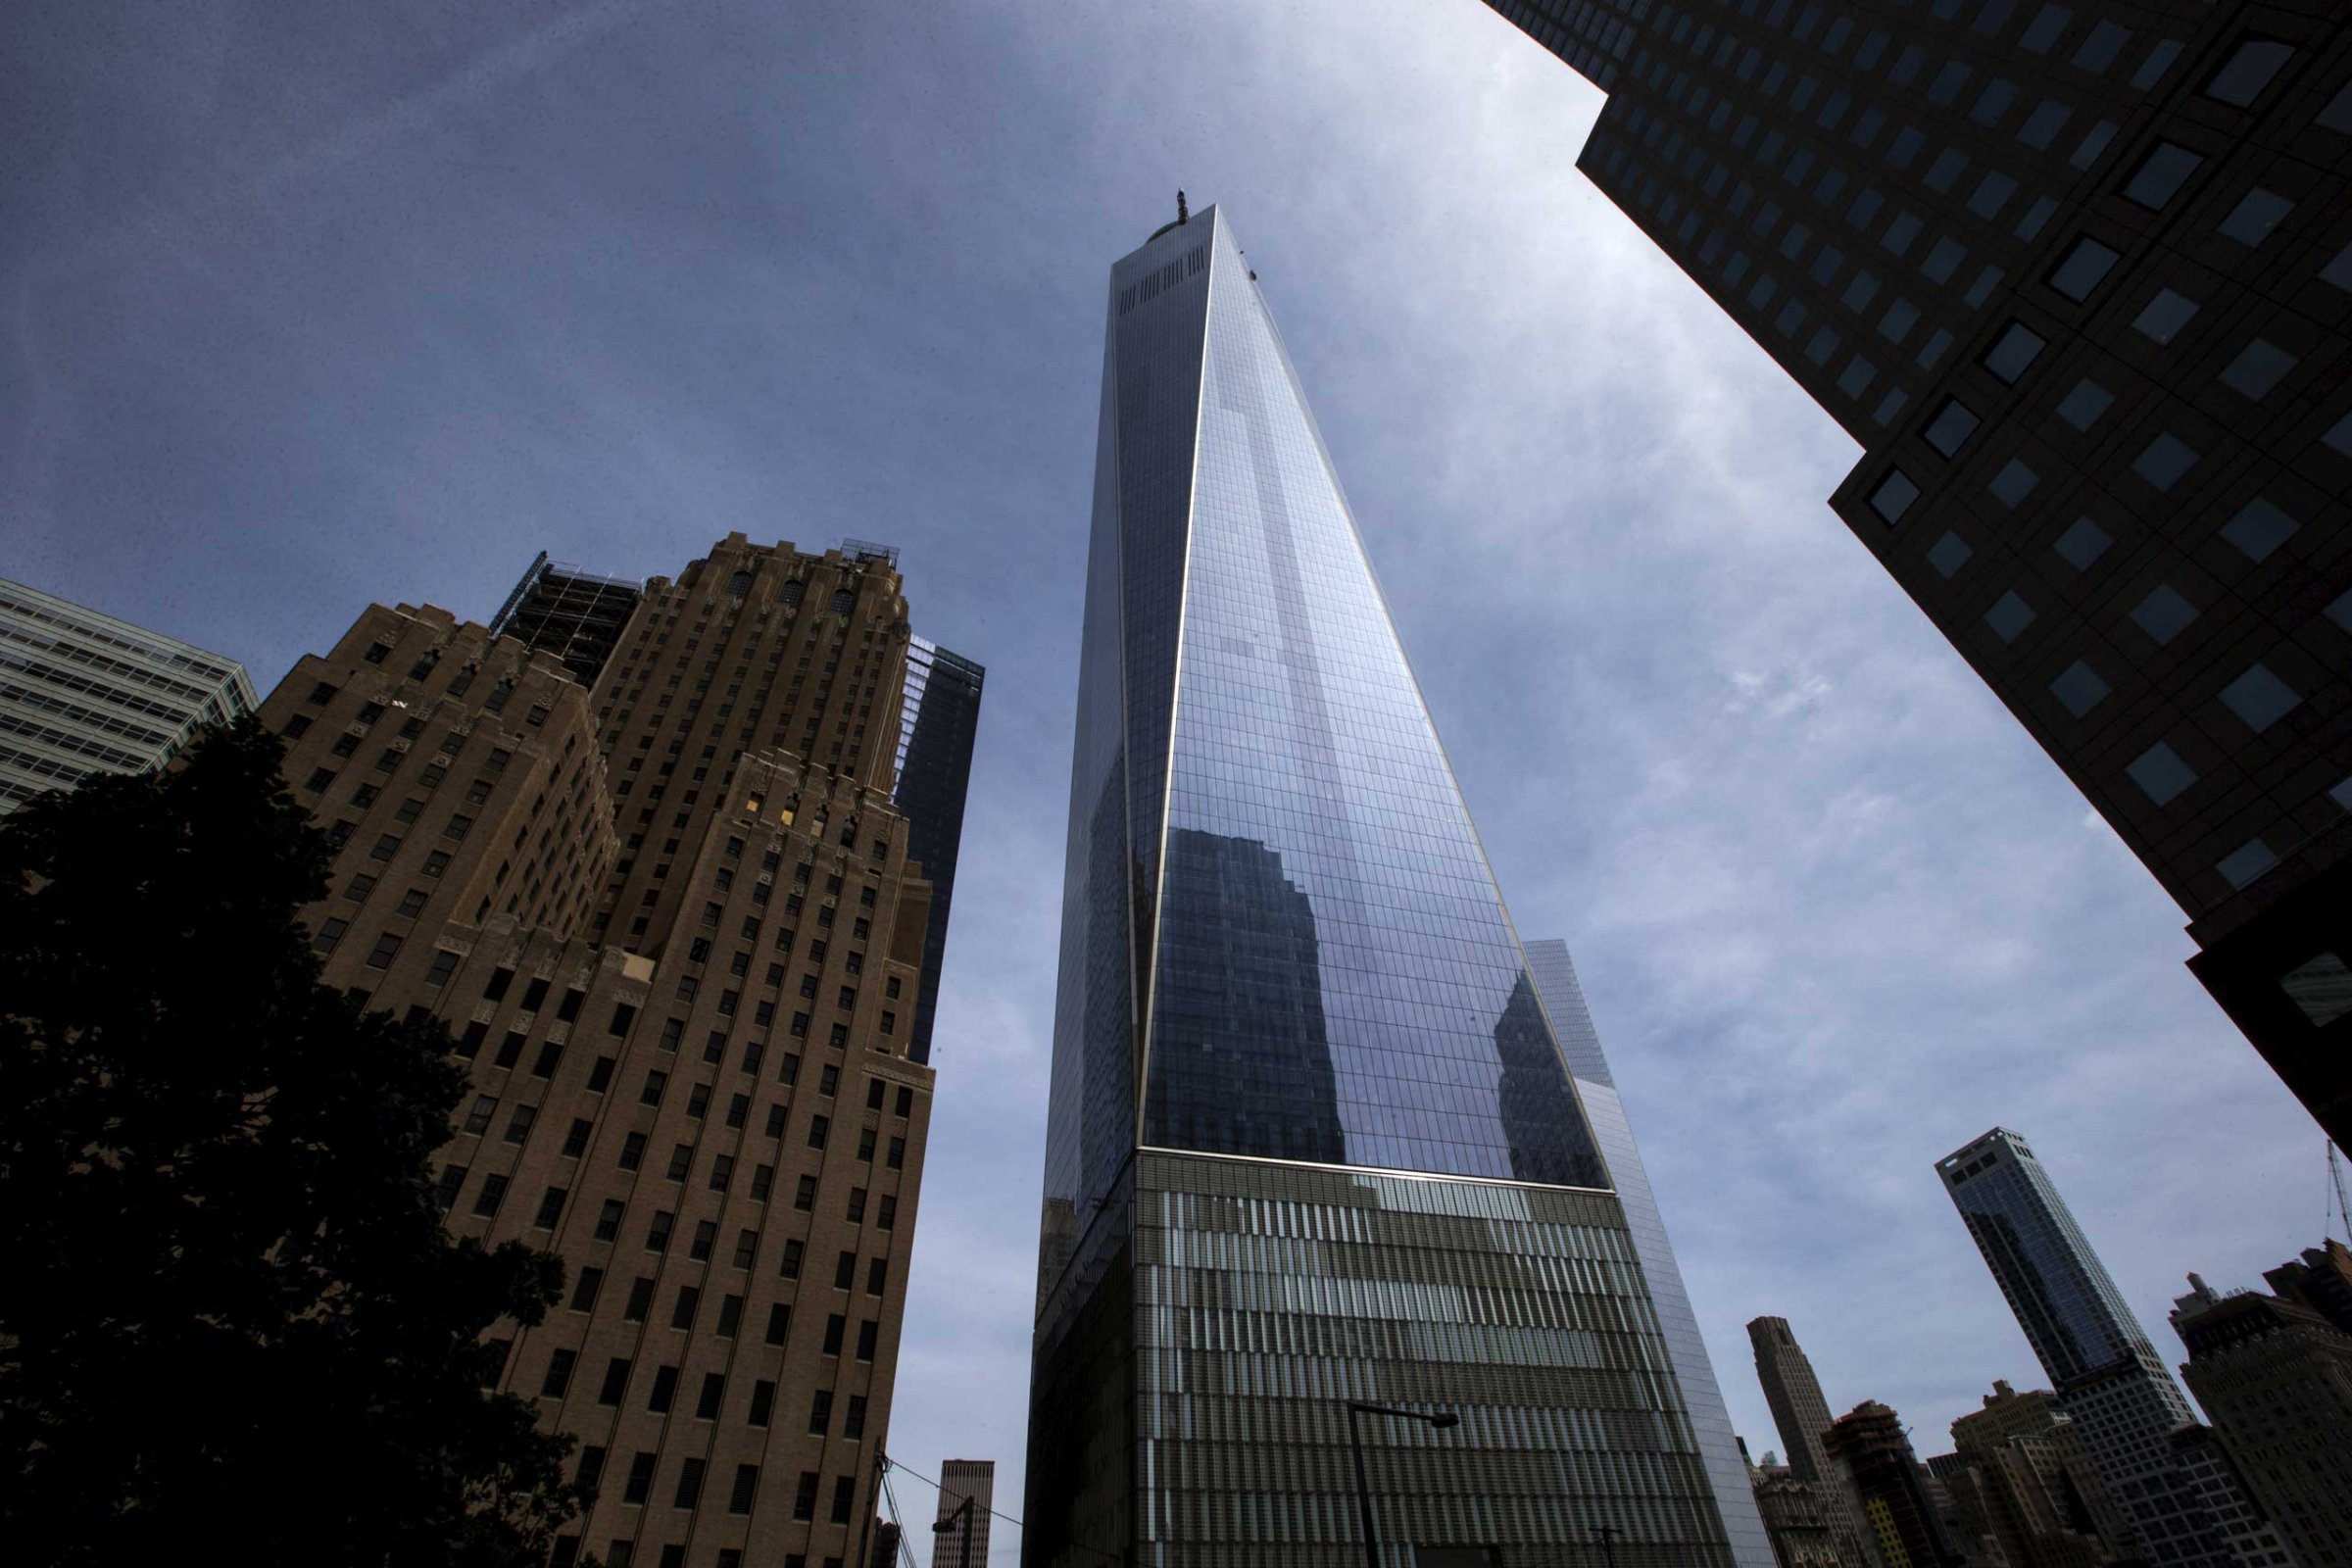 The One World Trade Center Tower is seen from West Street in New York